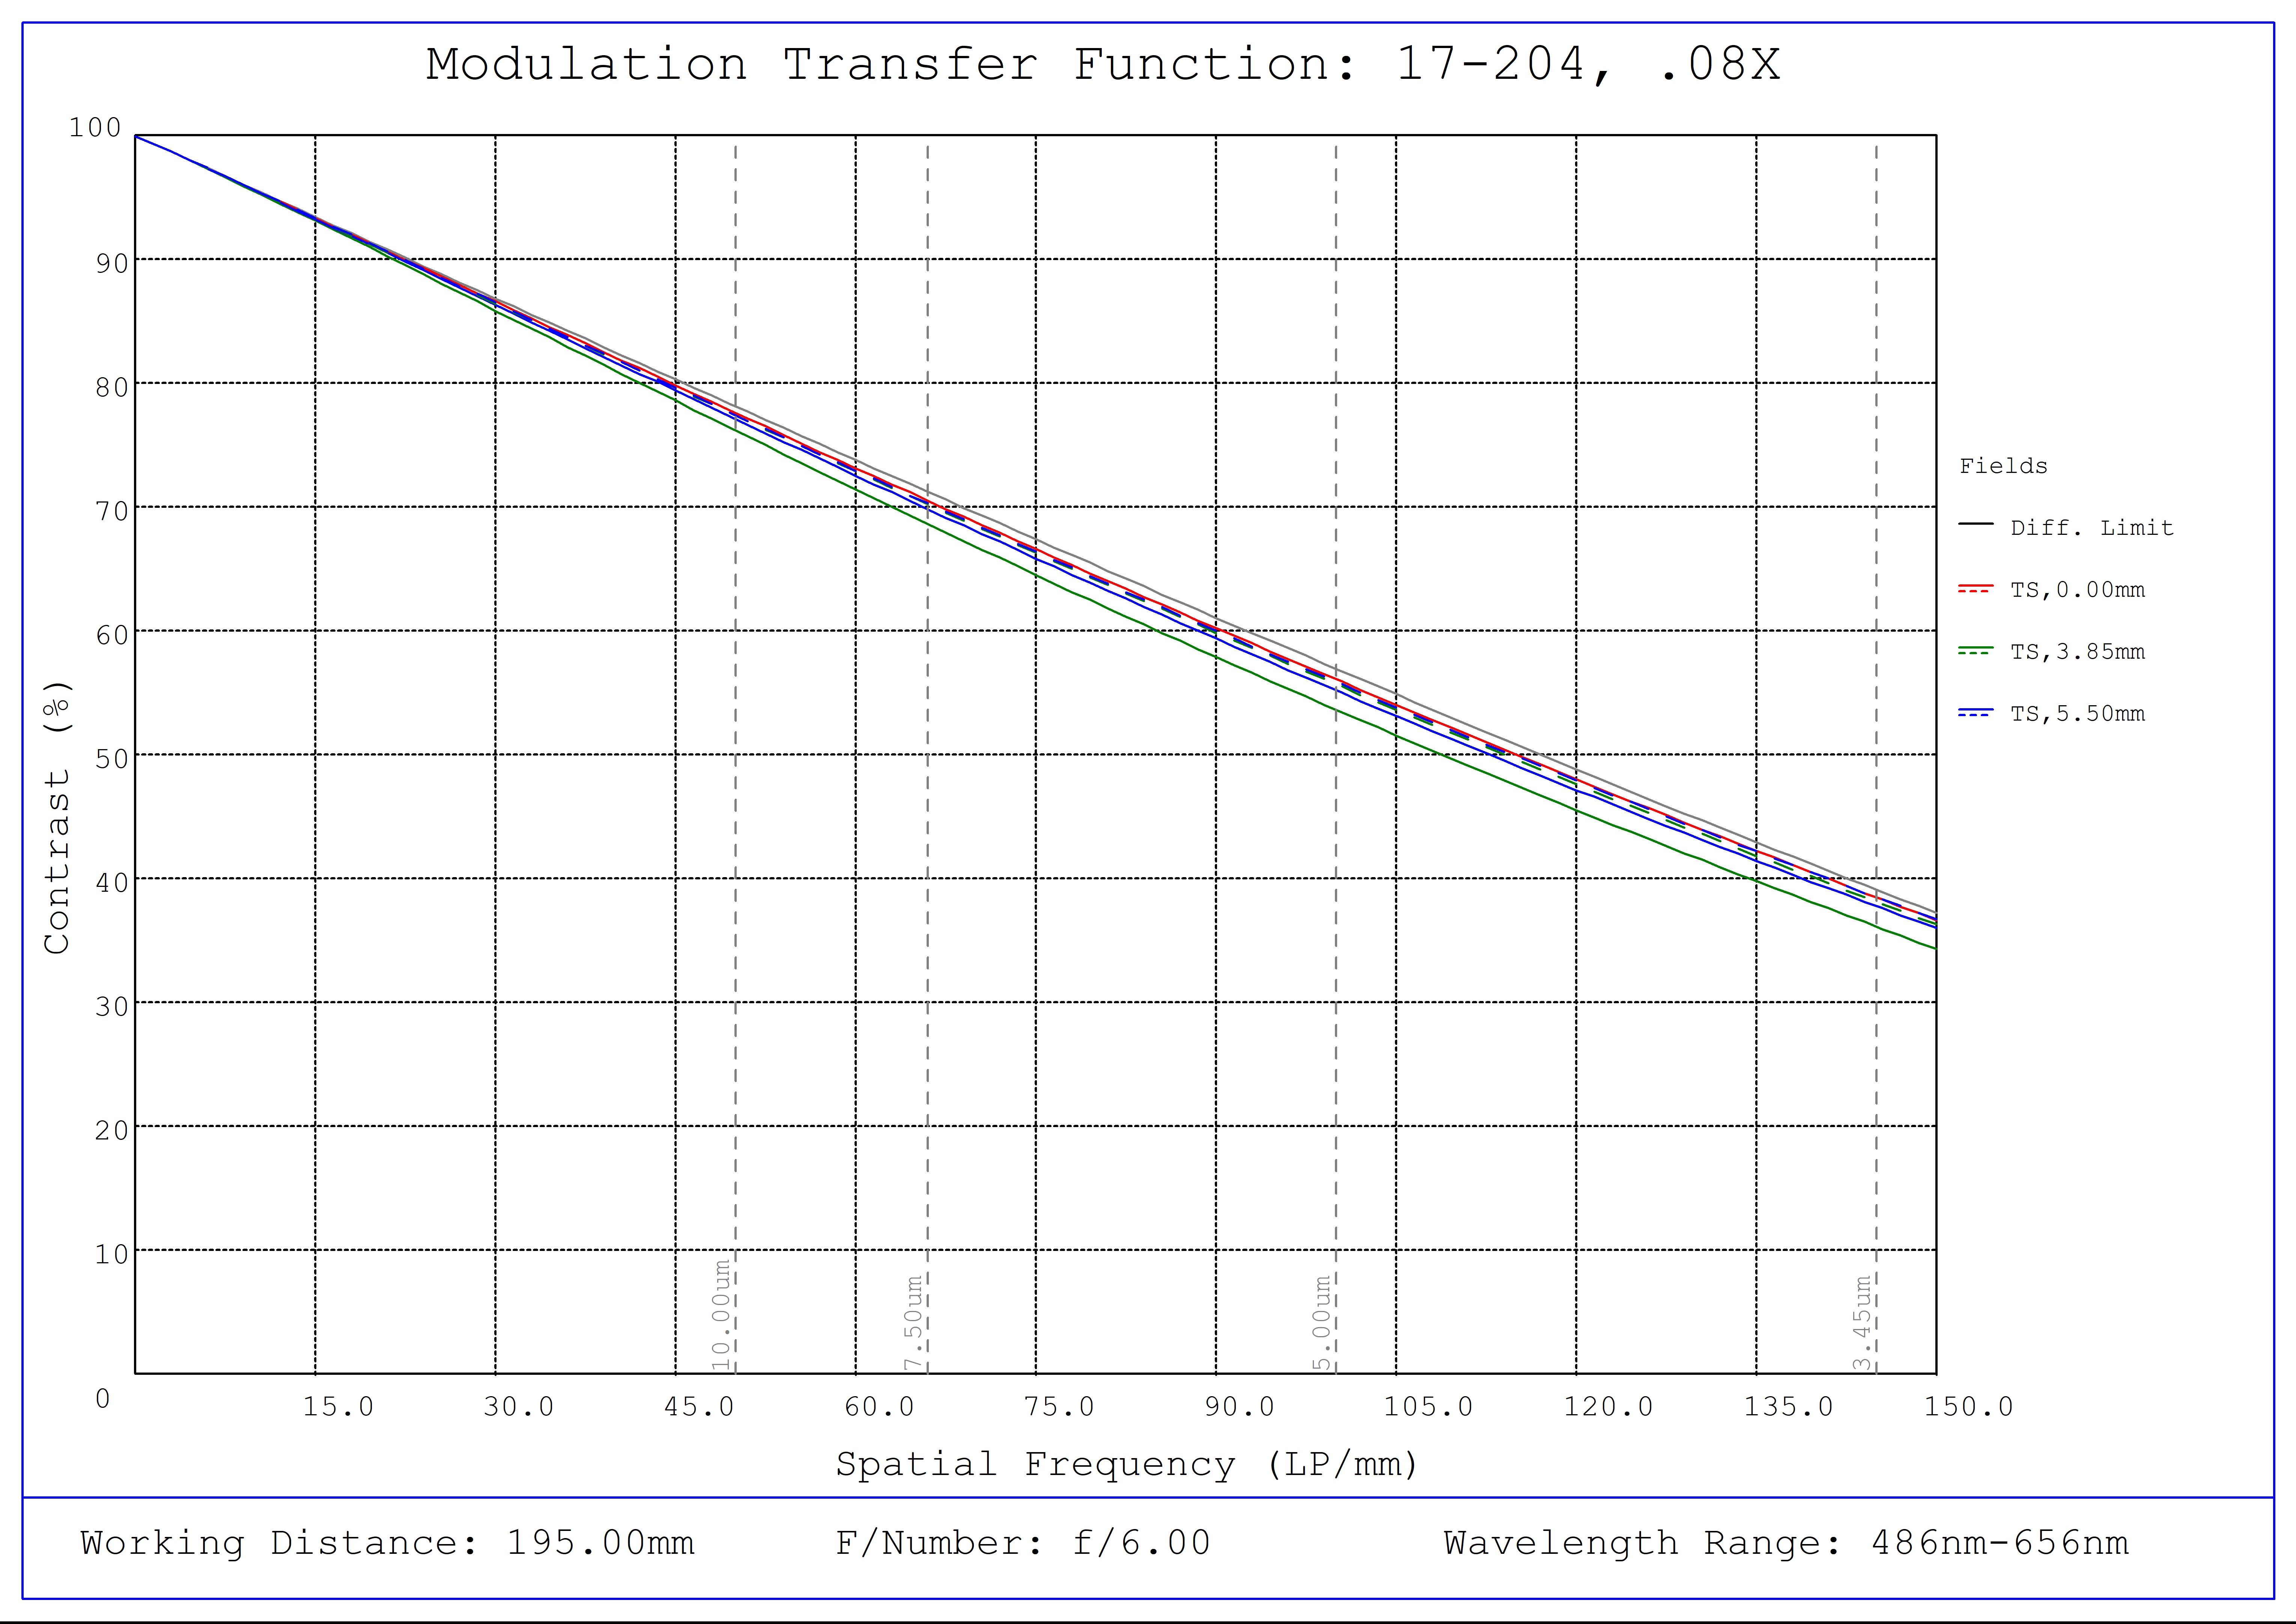 #17-204, 0.08X GoldTL™ Telecentric Lens (Mount Included), Modulated Transfer Function (MTF) Plot, 195mm Working Distance, f6